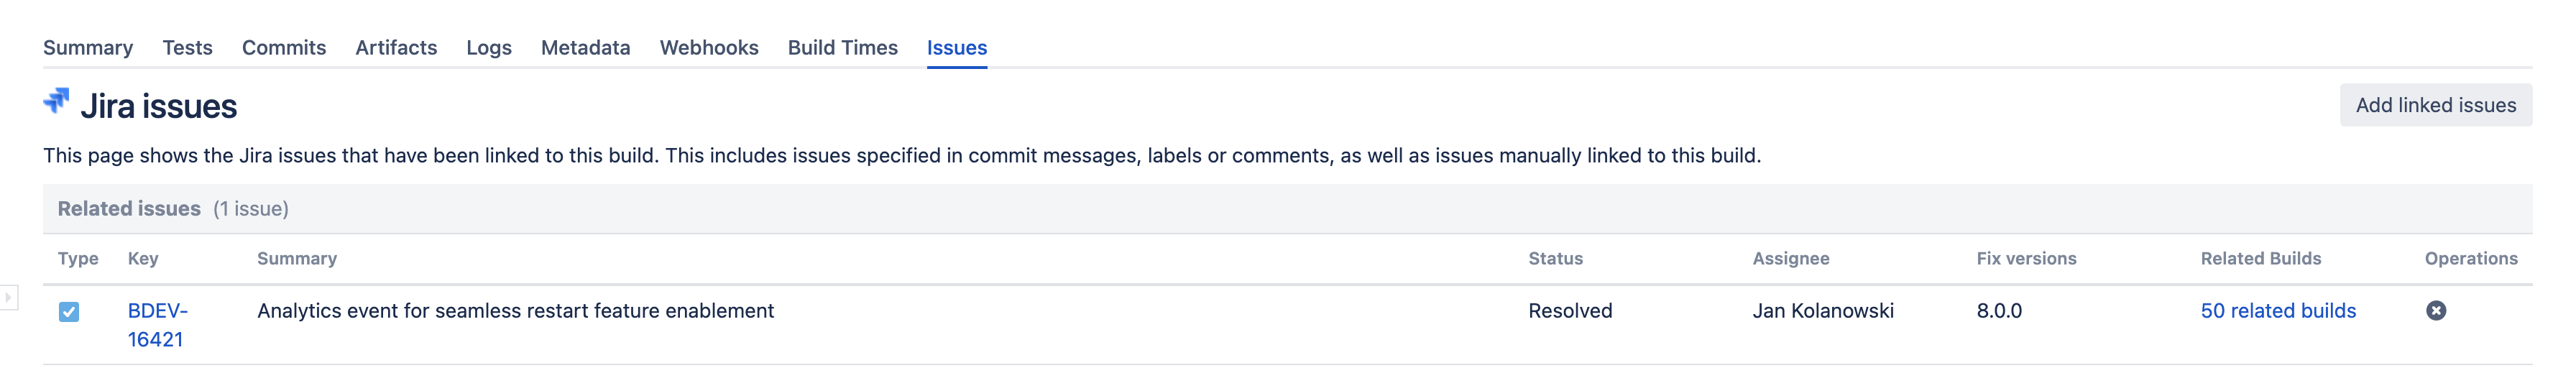 Jira issues in the Issues tab of build summary